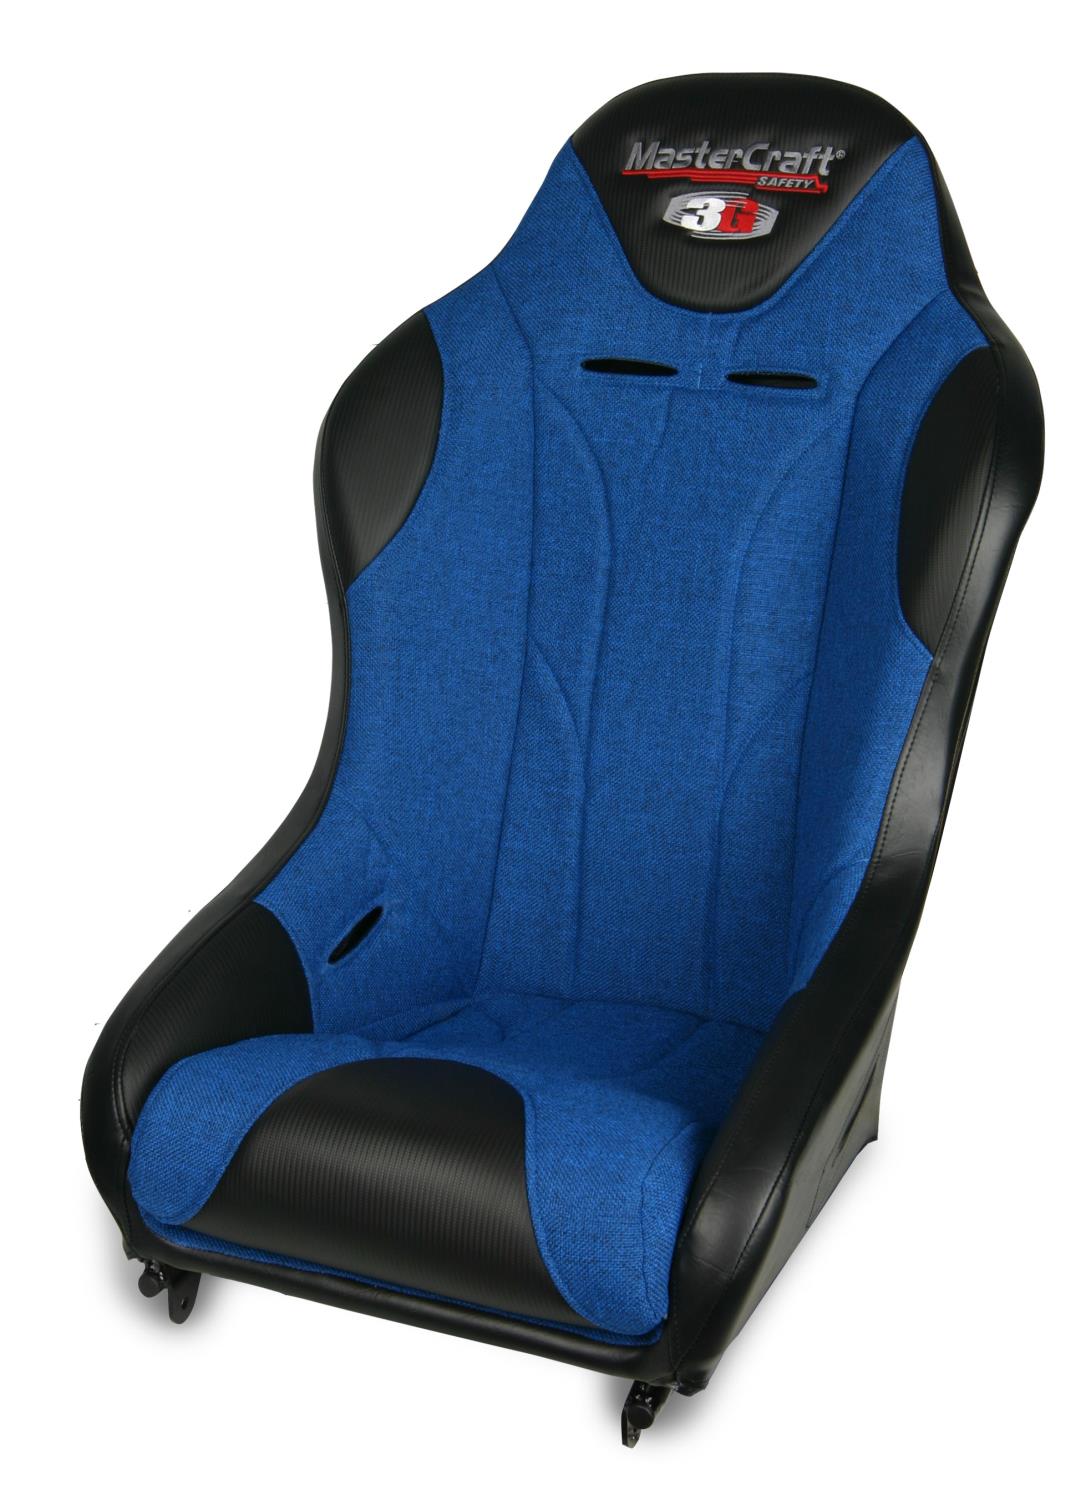 572023 1 in. WIDER 3G-4 Seat w/DirtSport Stitch Pattern, Black with Blue Fabric Center and BlueSide Panels, Black Band